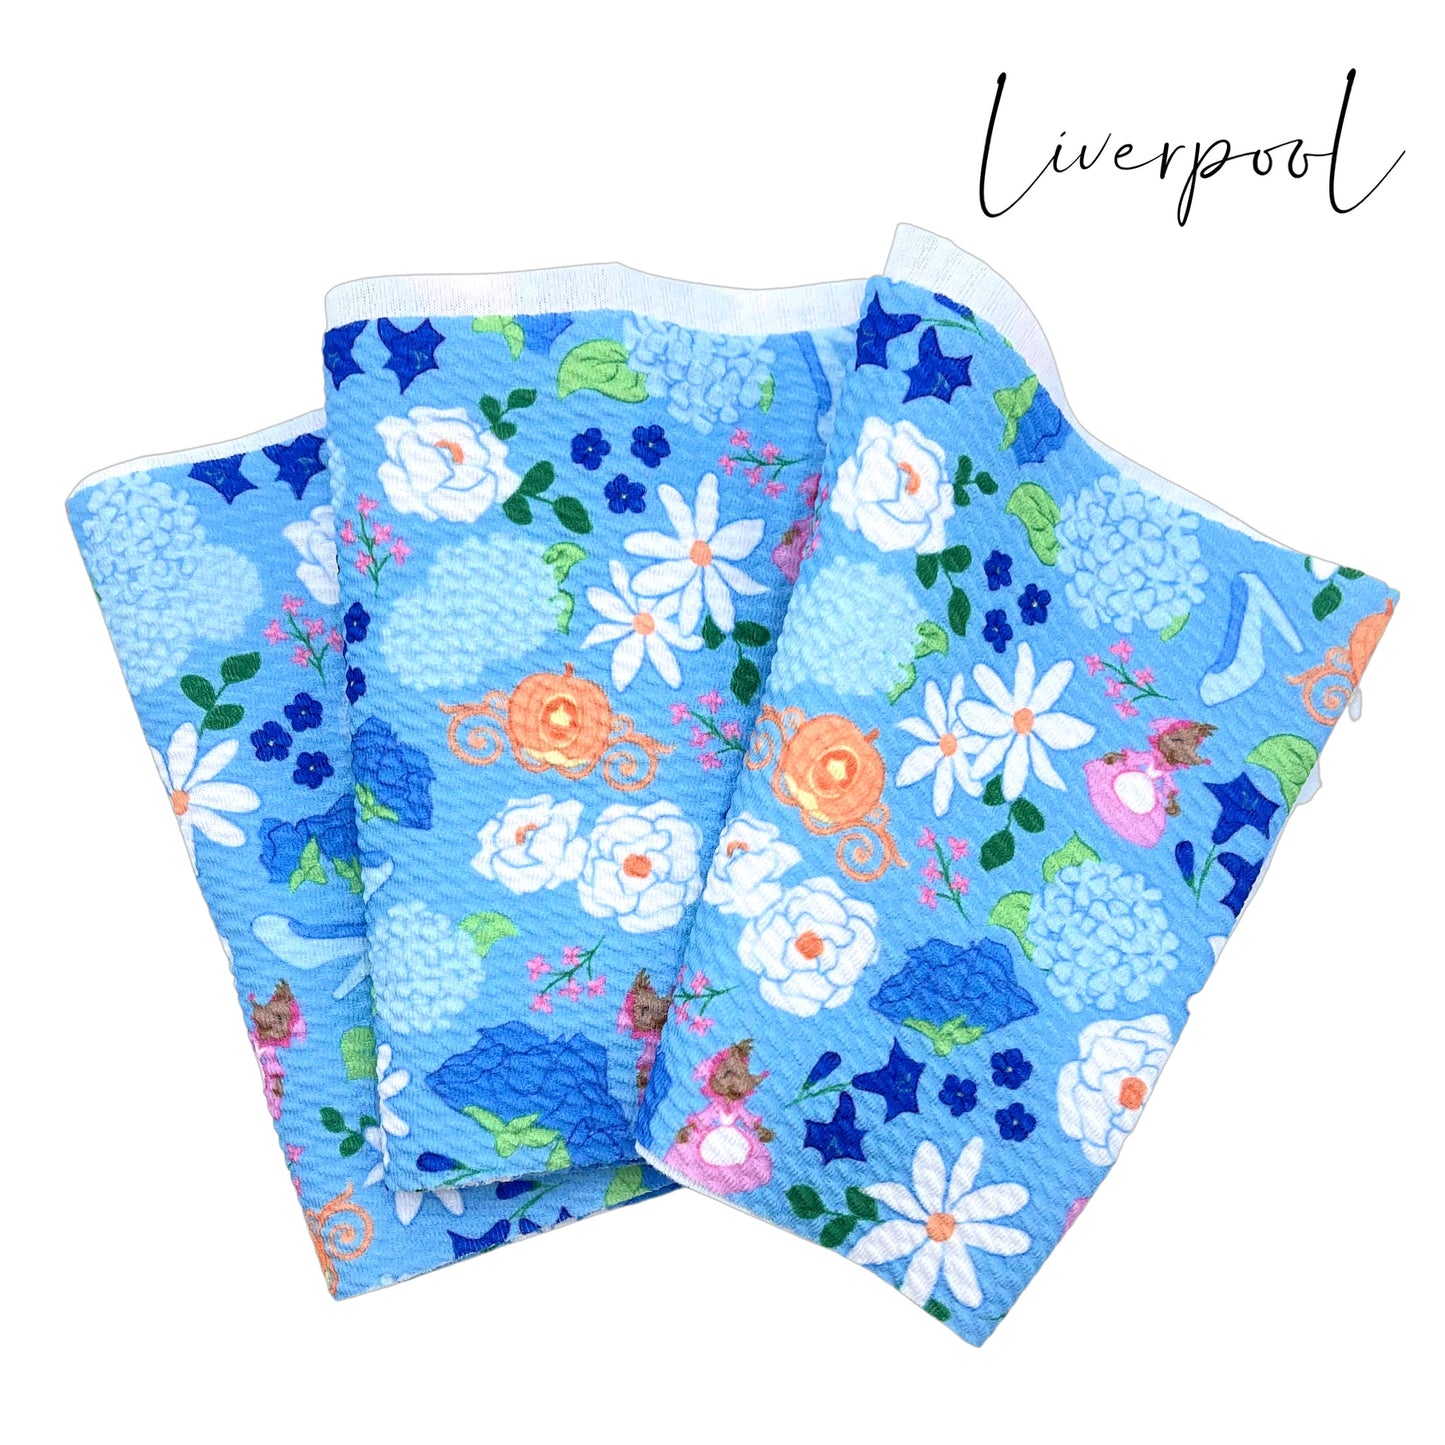 Folded light blue liverpool fabric strip with white, blue, navy, and baby blue princess floral pattern including a carriage, glass slipper, and female mice.